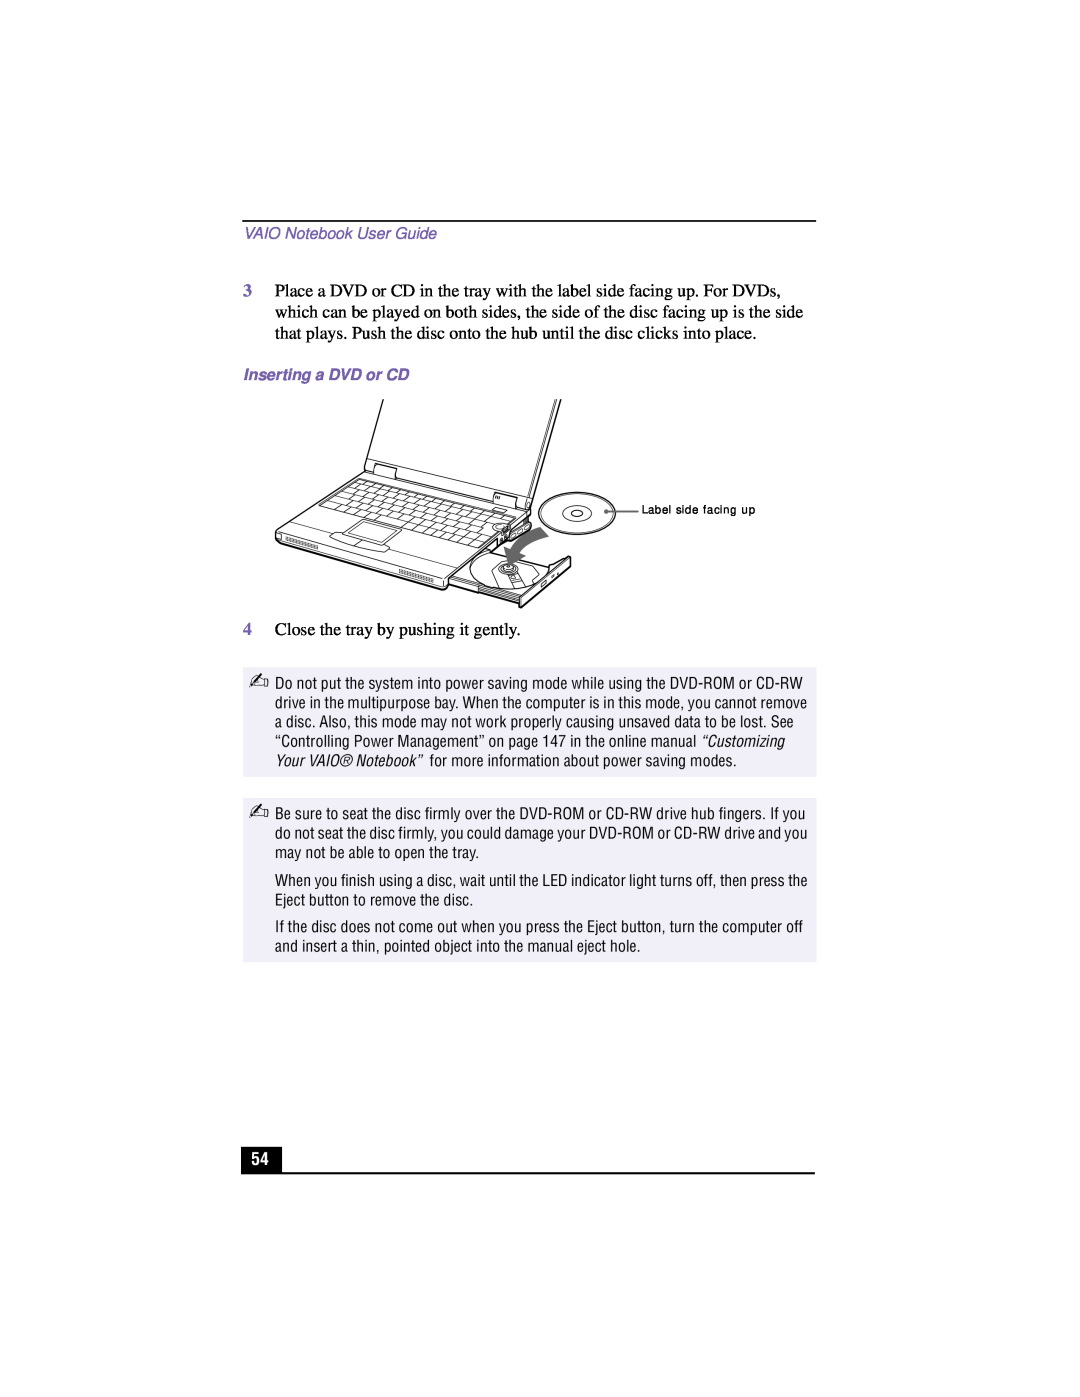 Sony PCG-XG500K, PCG-XG700K manual Close the tray by pushing it gently, VAIO Notebook User Guide, Inserting a DVD or CD 